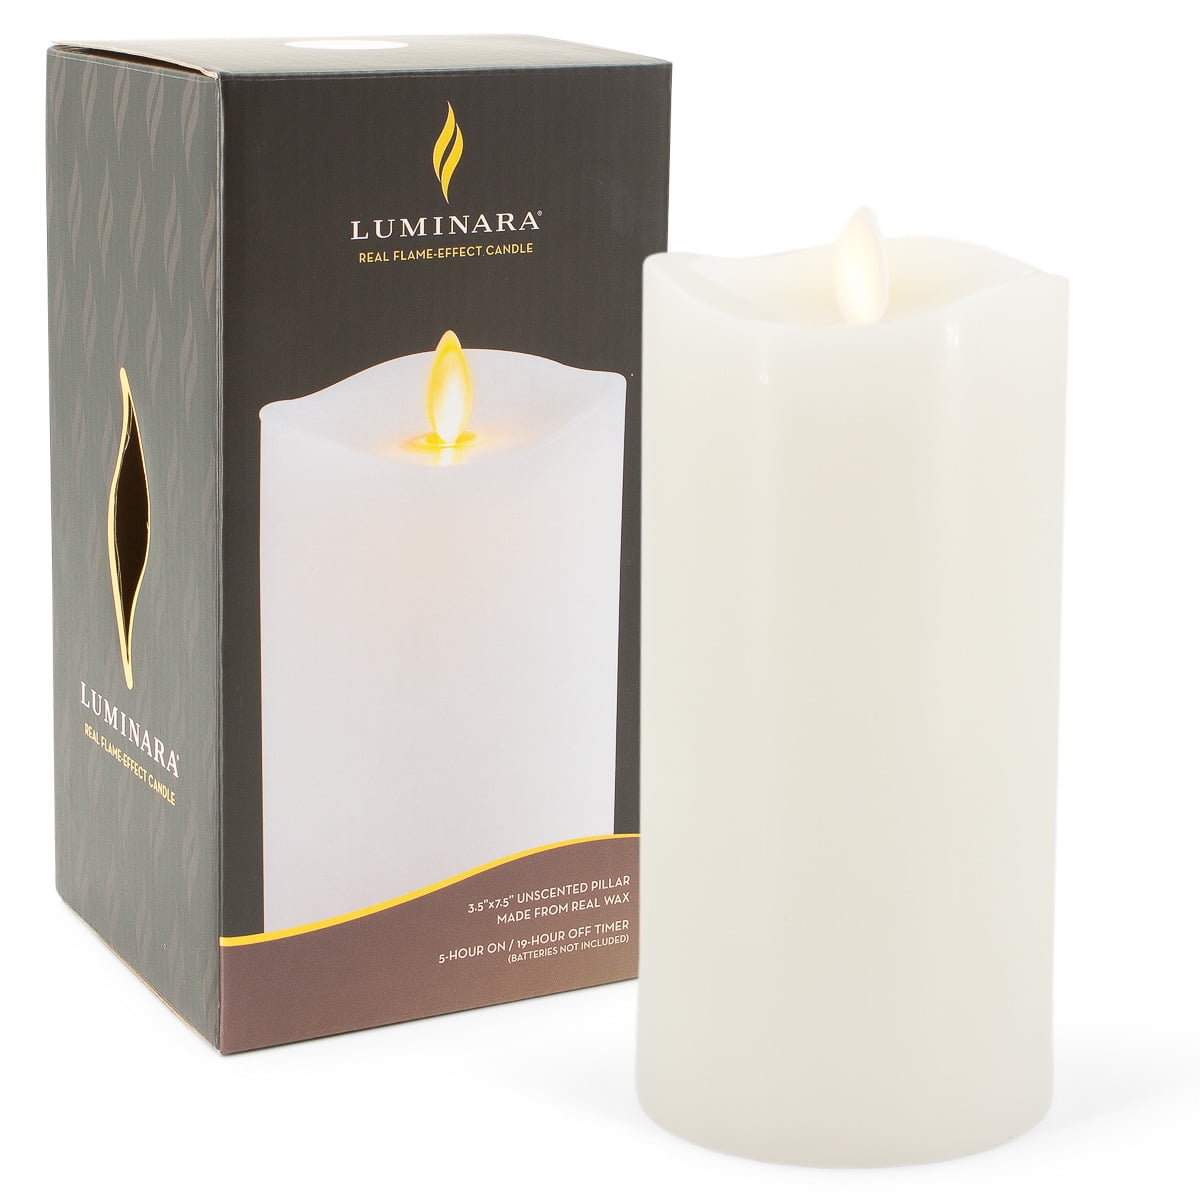 Luminara Flameless Moving Flicker Led Candles Cinnamon Scented Set of 2 Wine Red 